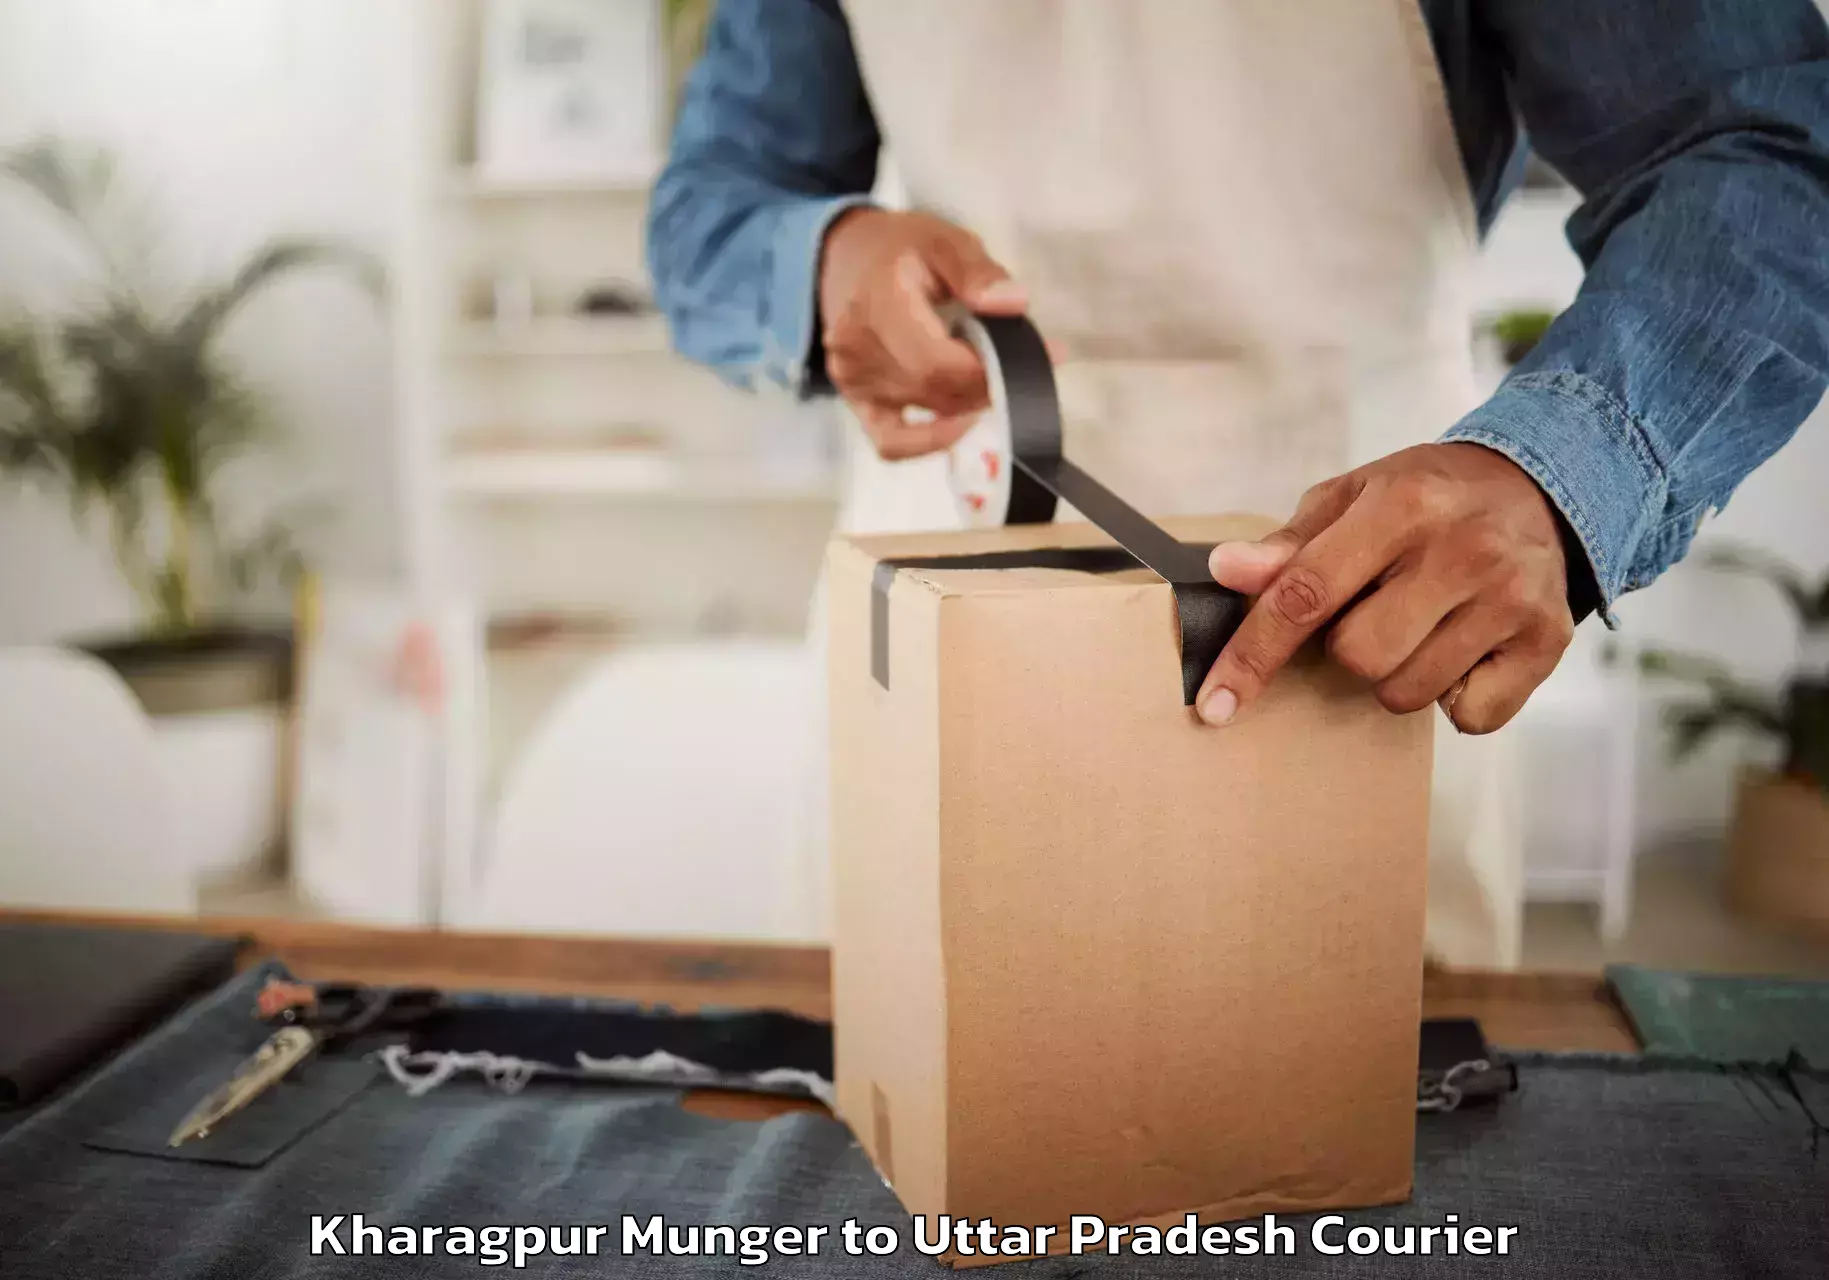 Quality relocation services Kharagpur Munger to Agra